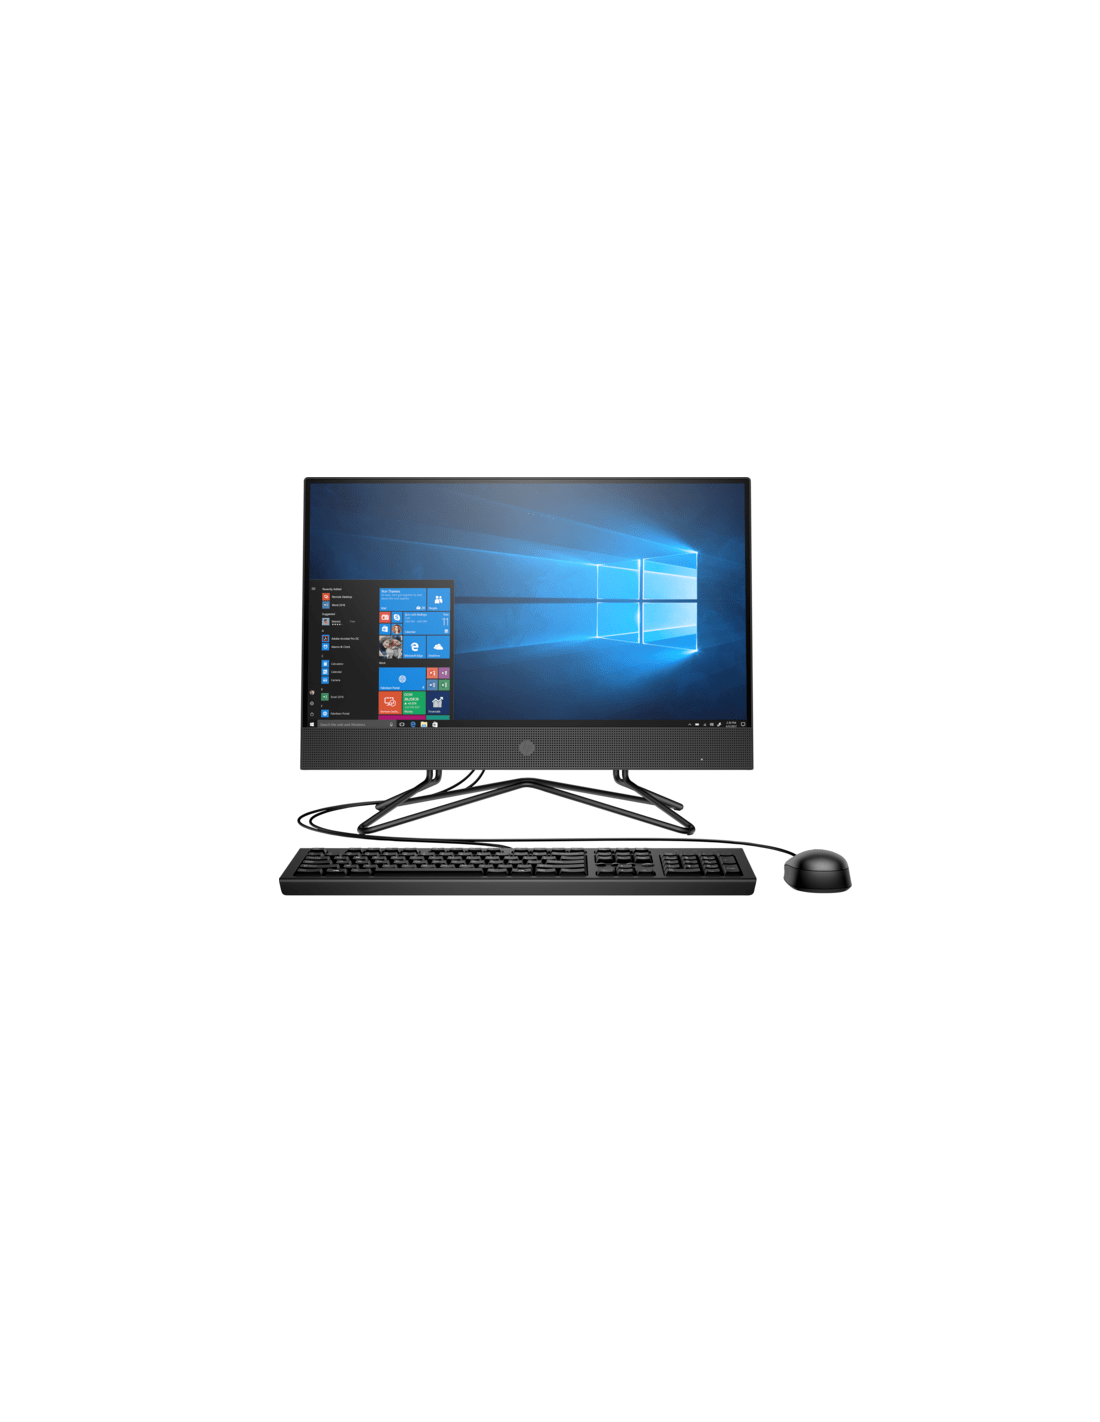 HP 205 G4 All in One PC